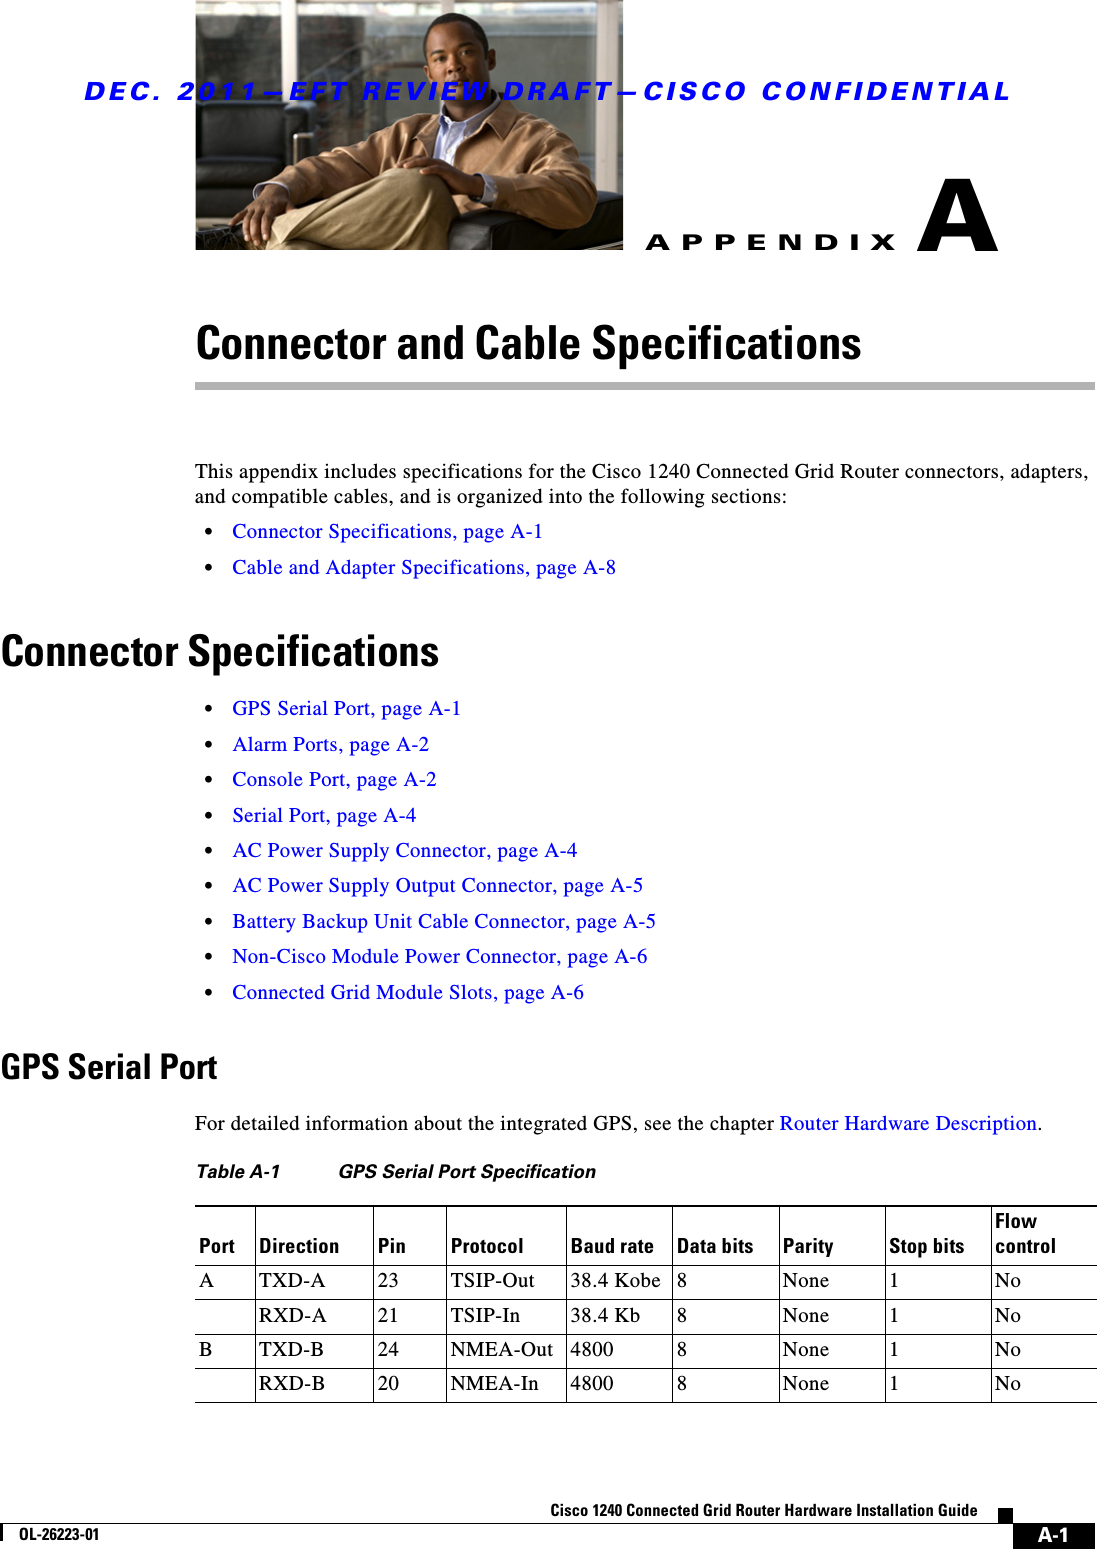 DEC. 2011—EFT REVIEW DRAFT—CISCO CONFIDENTIALA-1Cisco 1240 Connected Grid Router Hardware Installation GuideOL-26223-01APPENDIXAConnector and Cable SpecificationsThis appendix includes specifications for the Cisco 1240 Connected Grid Router connectors, adapters, and compatible cables, and is organized into the following sections:  • Connector Specifications, page A-1  • Cable and Adapter Specifications, page A-8Connector Specifications  • GPS Serial Port, page A-1  • Alarm Ports, page A-2  • Console Port, page A-2  • Serial Port, page A-4  • AC Power Supply Connector, page A-4  • AC Power Supply Output Connector, page A-5  • Battery Backup Unit Cable Connector, page A-5  • Non-Cisco Module Power Connector, page A-6  • Connected Grid Module Slots, page A-6GPS Serial PortFor detailed information about the integrated GPS, see the chapter Router Hardware Description.Table A-1 GPS Serial Port SpecificationPort Direction Pin Protocol Baud rate Data bits Parity Stop bitsFlow controlATXD-A 23 TSIP-Out 38.4 Kobe 8None 1NoRXD-A 21 TSIP-In 38.4 Kb 8None 1NoBTXD-B 24 NMEA-Out 4800 8None 1NoRXD-B 20 NMEA-In 4800 8None 1No